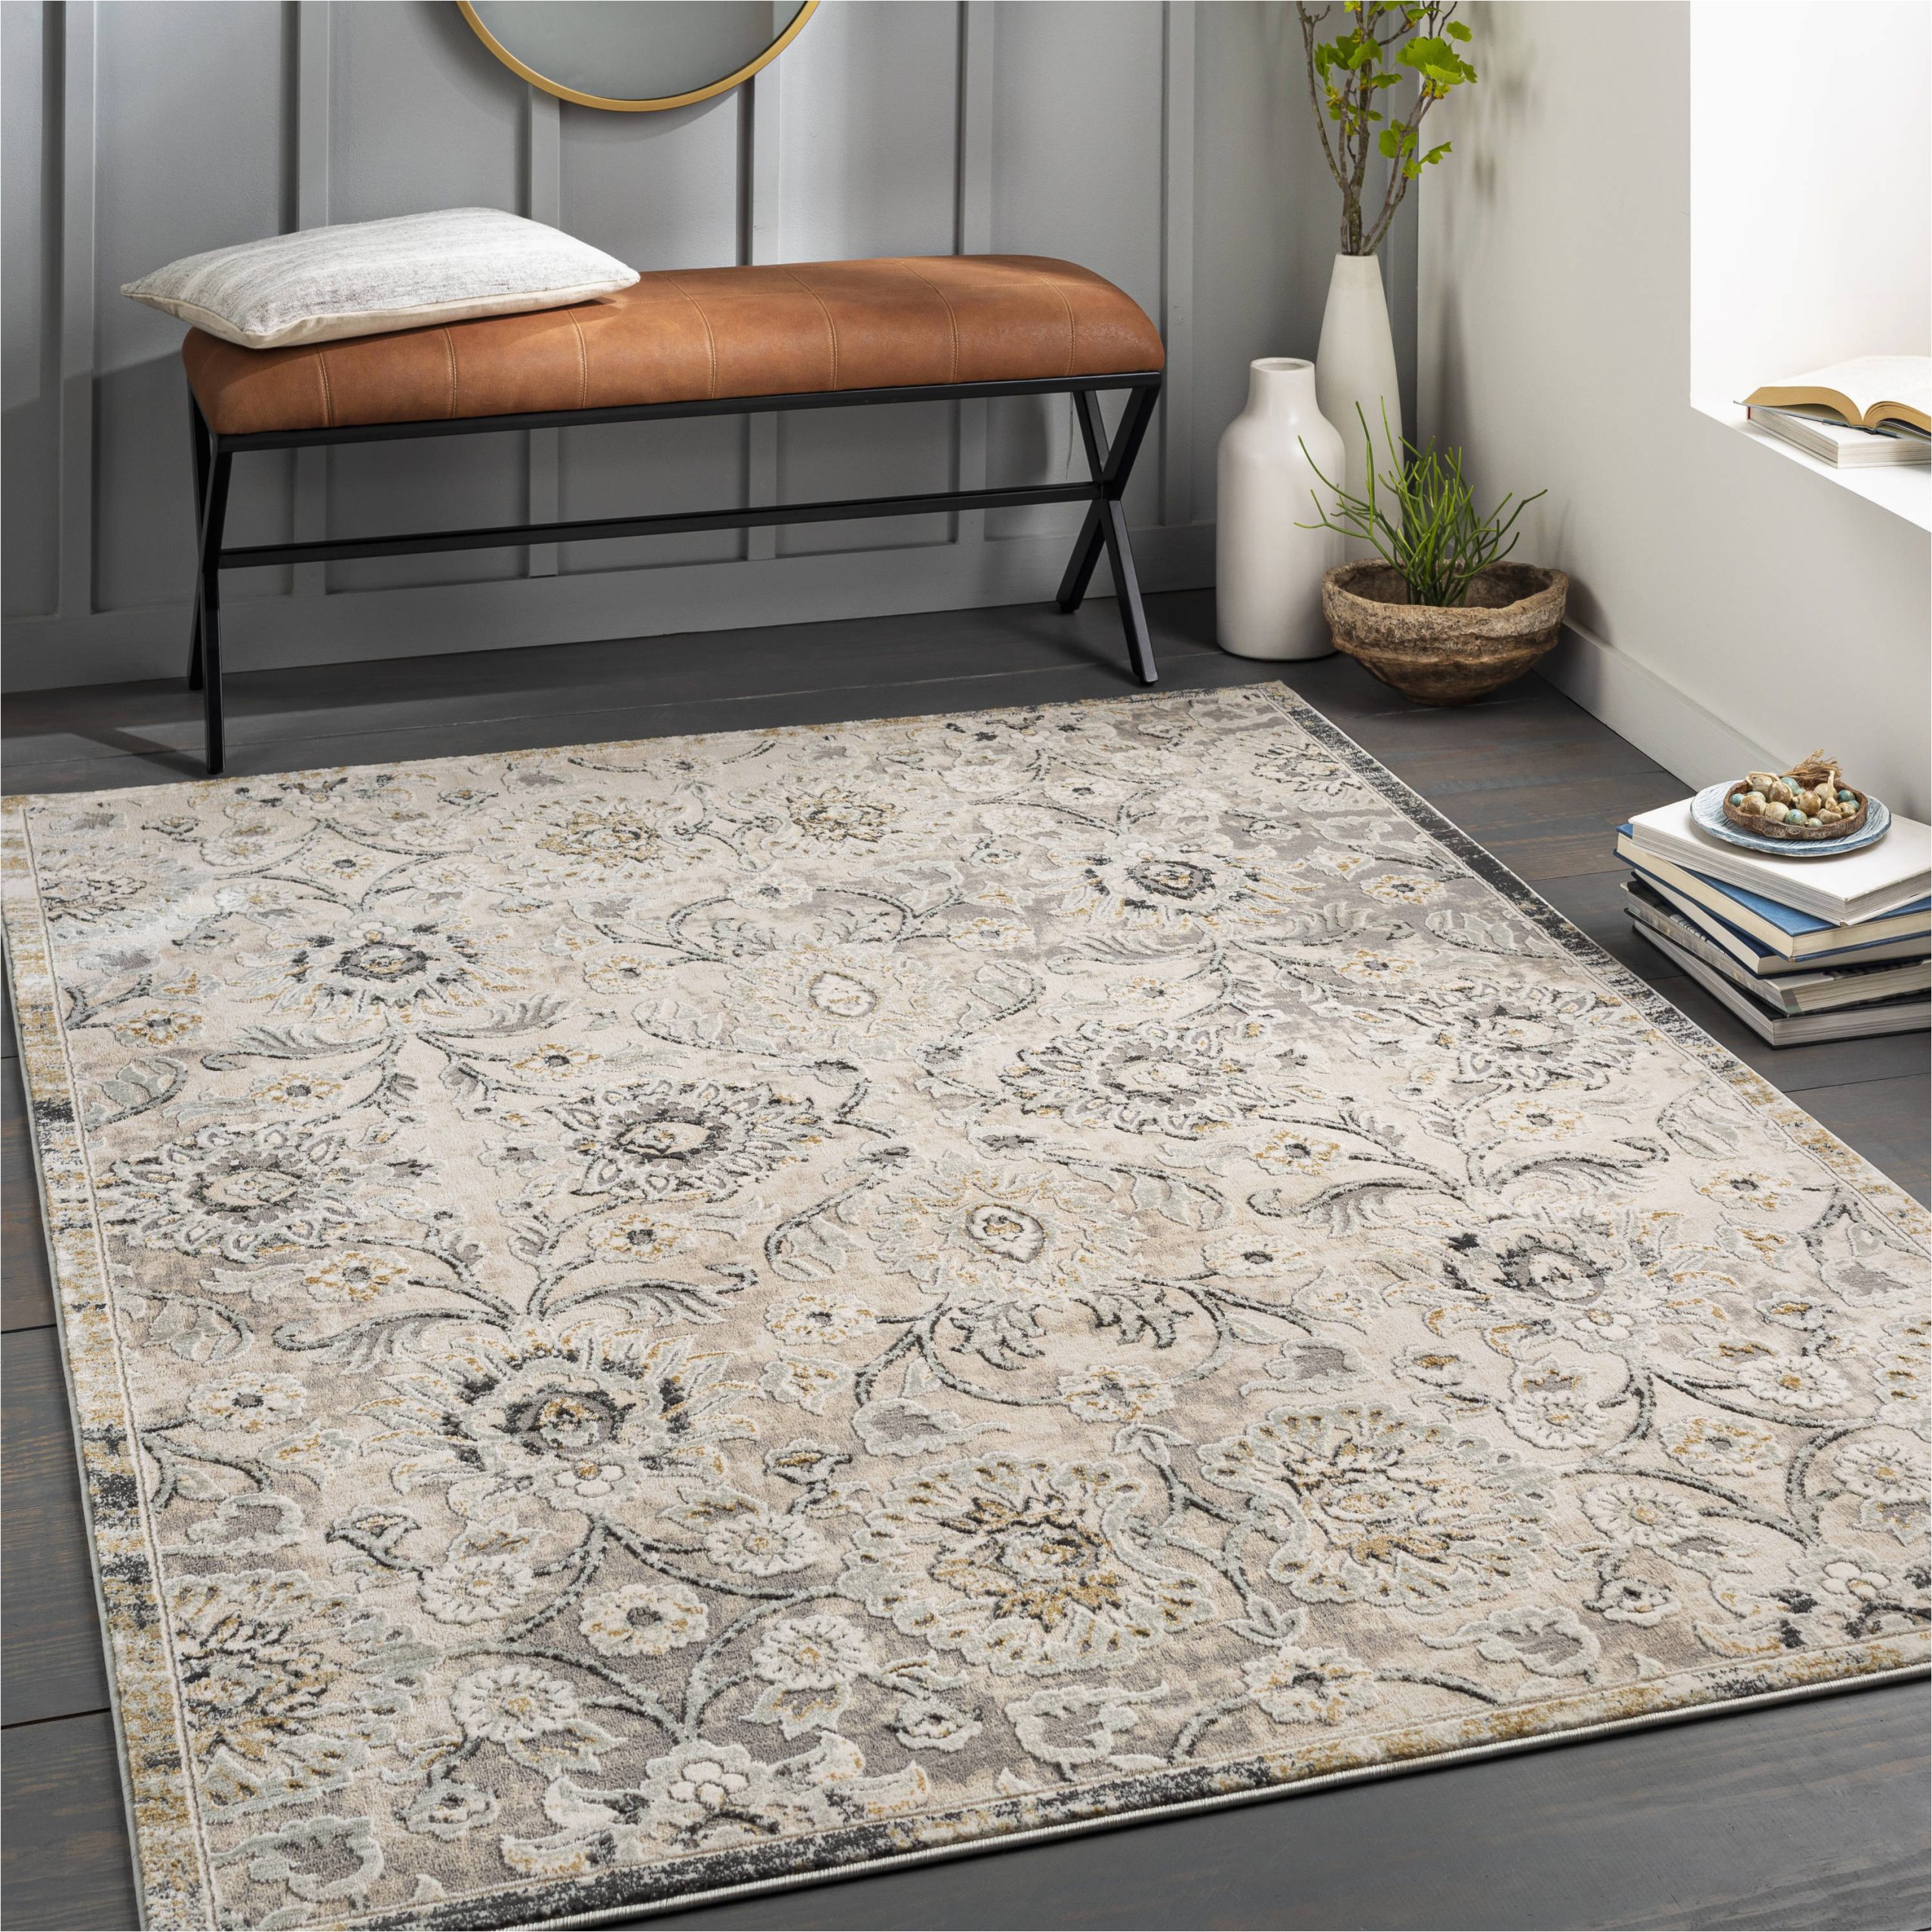 Area Rugs 10 X 12 Lowes Allen   Roth Delft 9 X 12 Taupe Indoor Abstract area Rug In the …